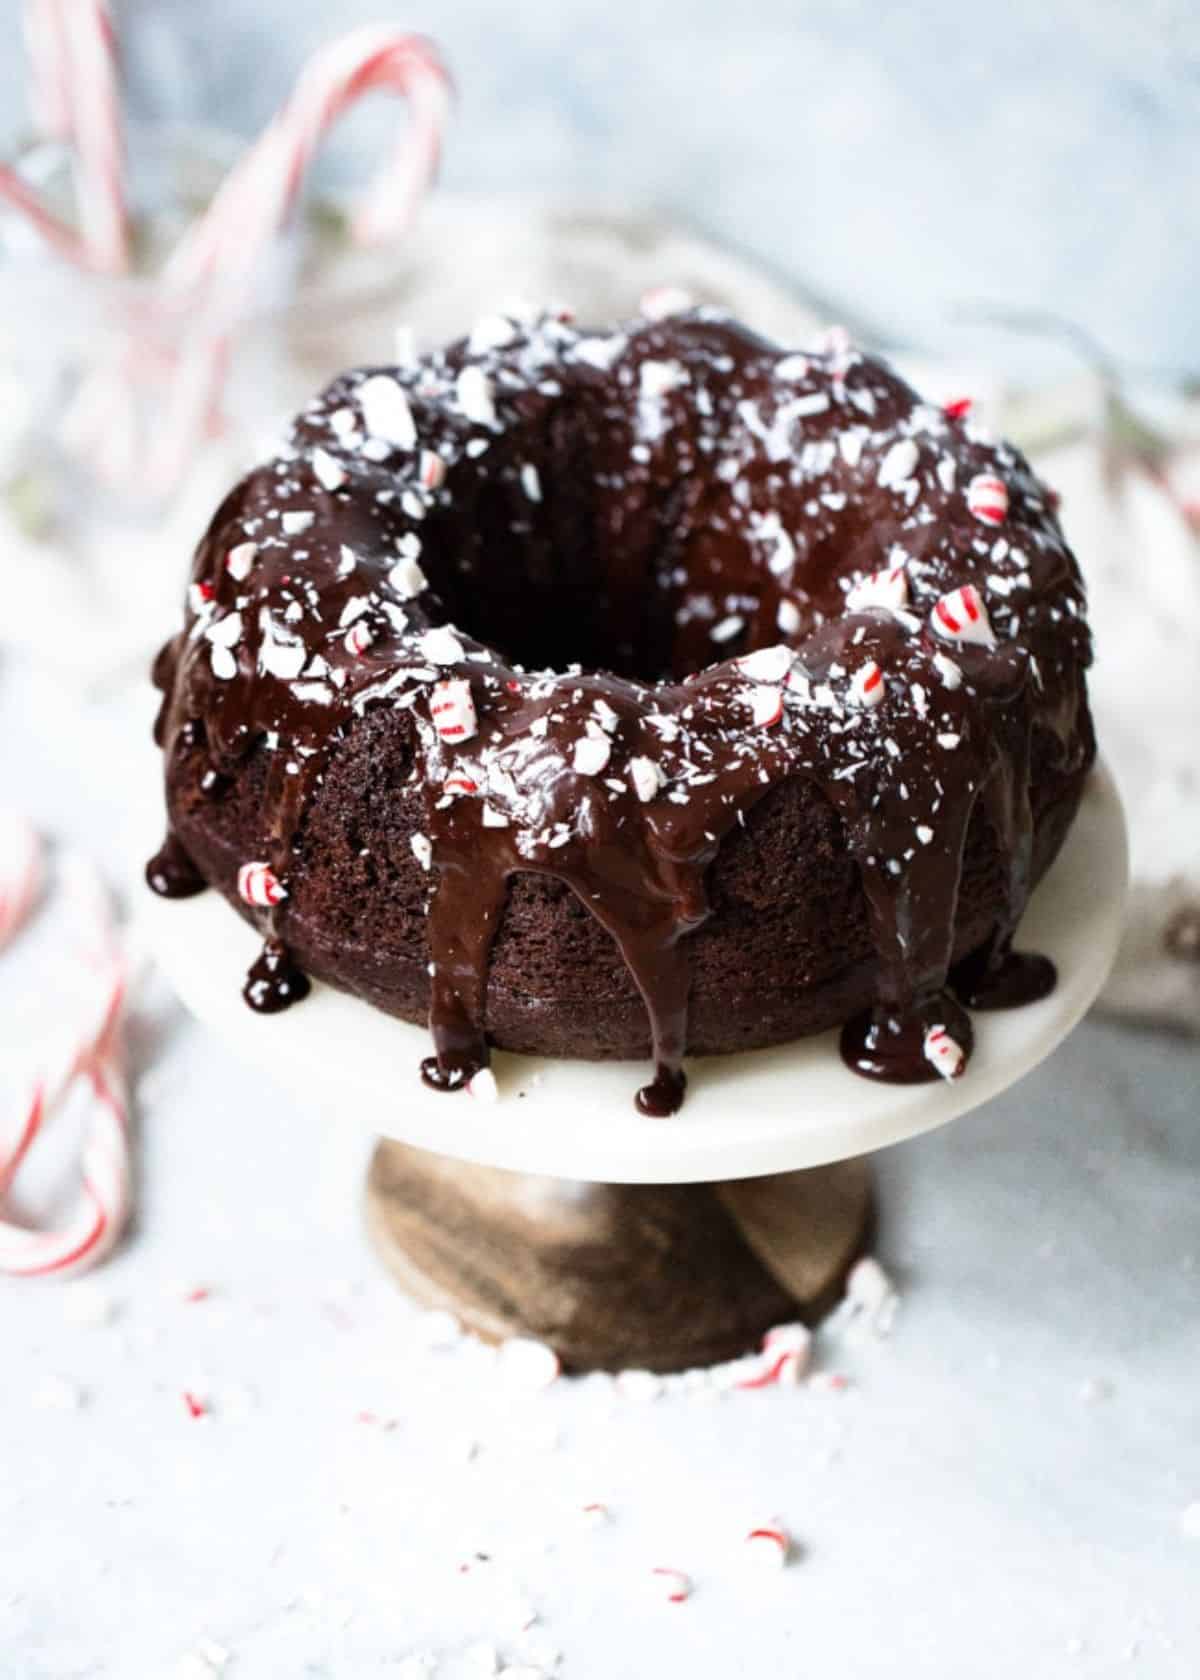 Scrumptious chocolate peppermint bundt cake on a cake tray.